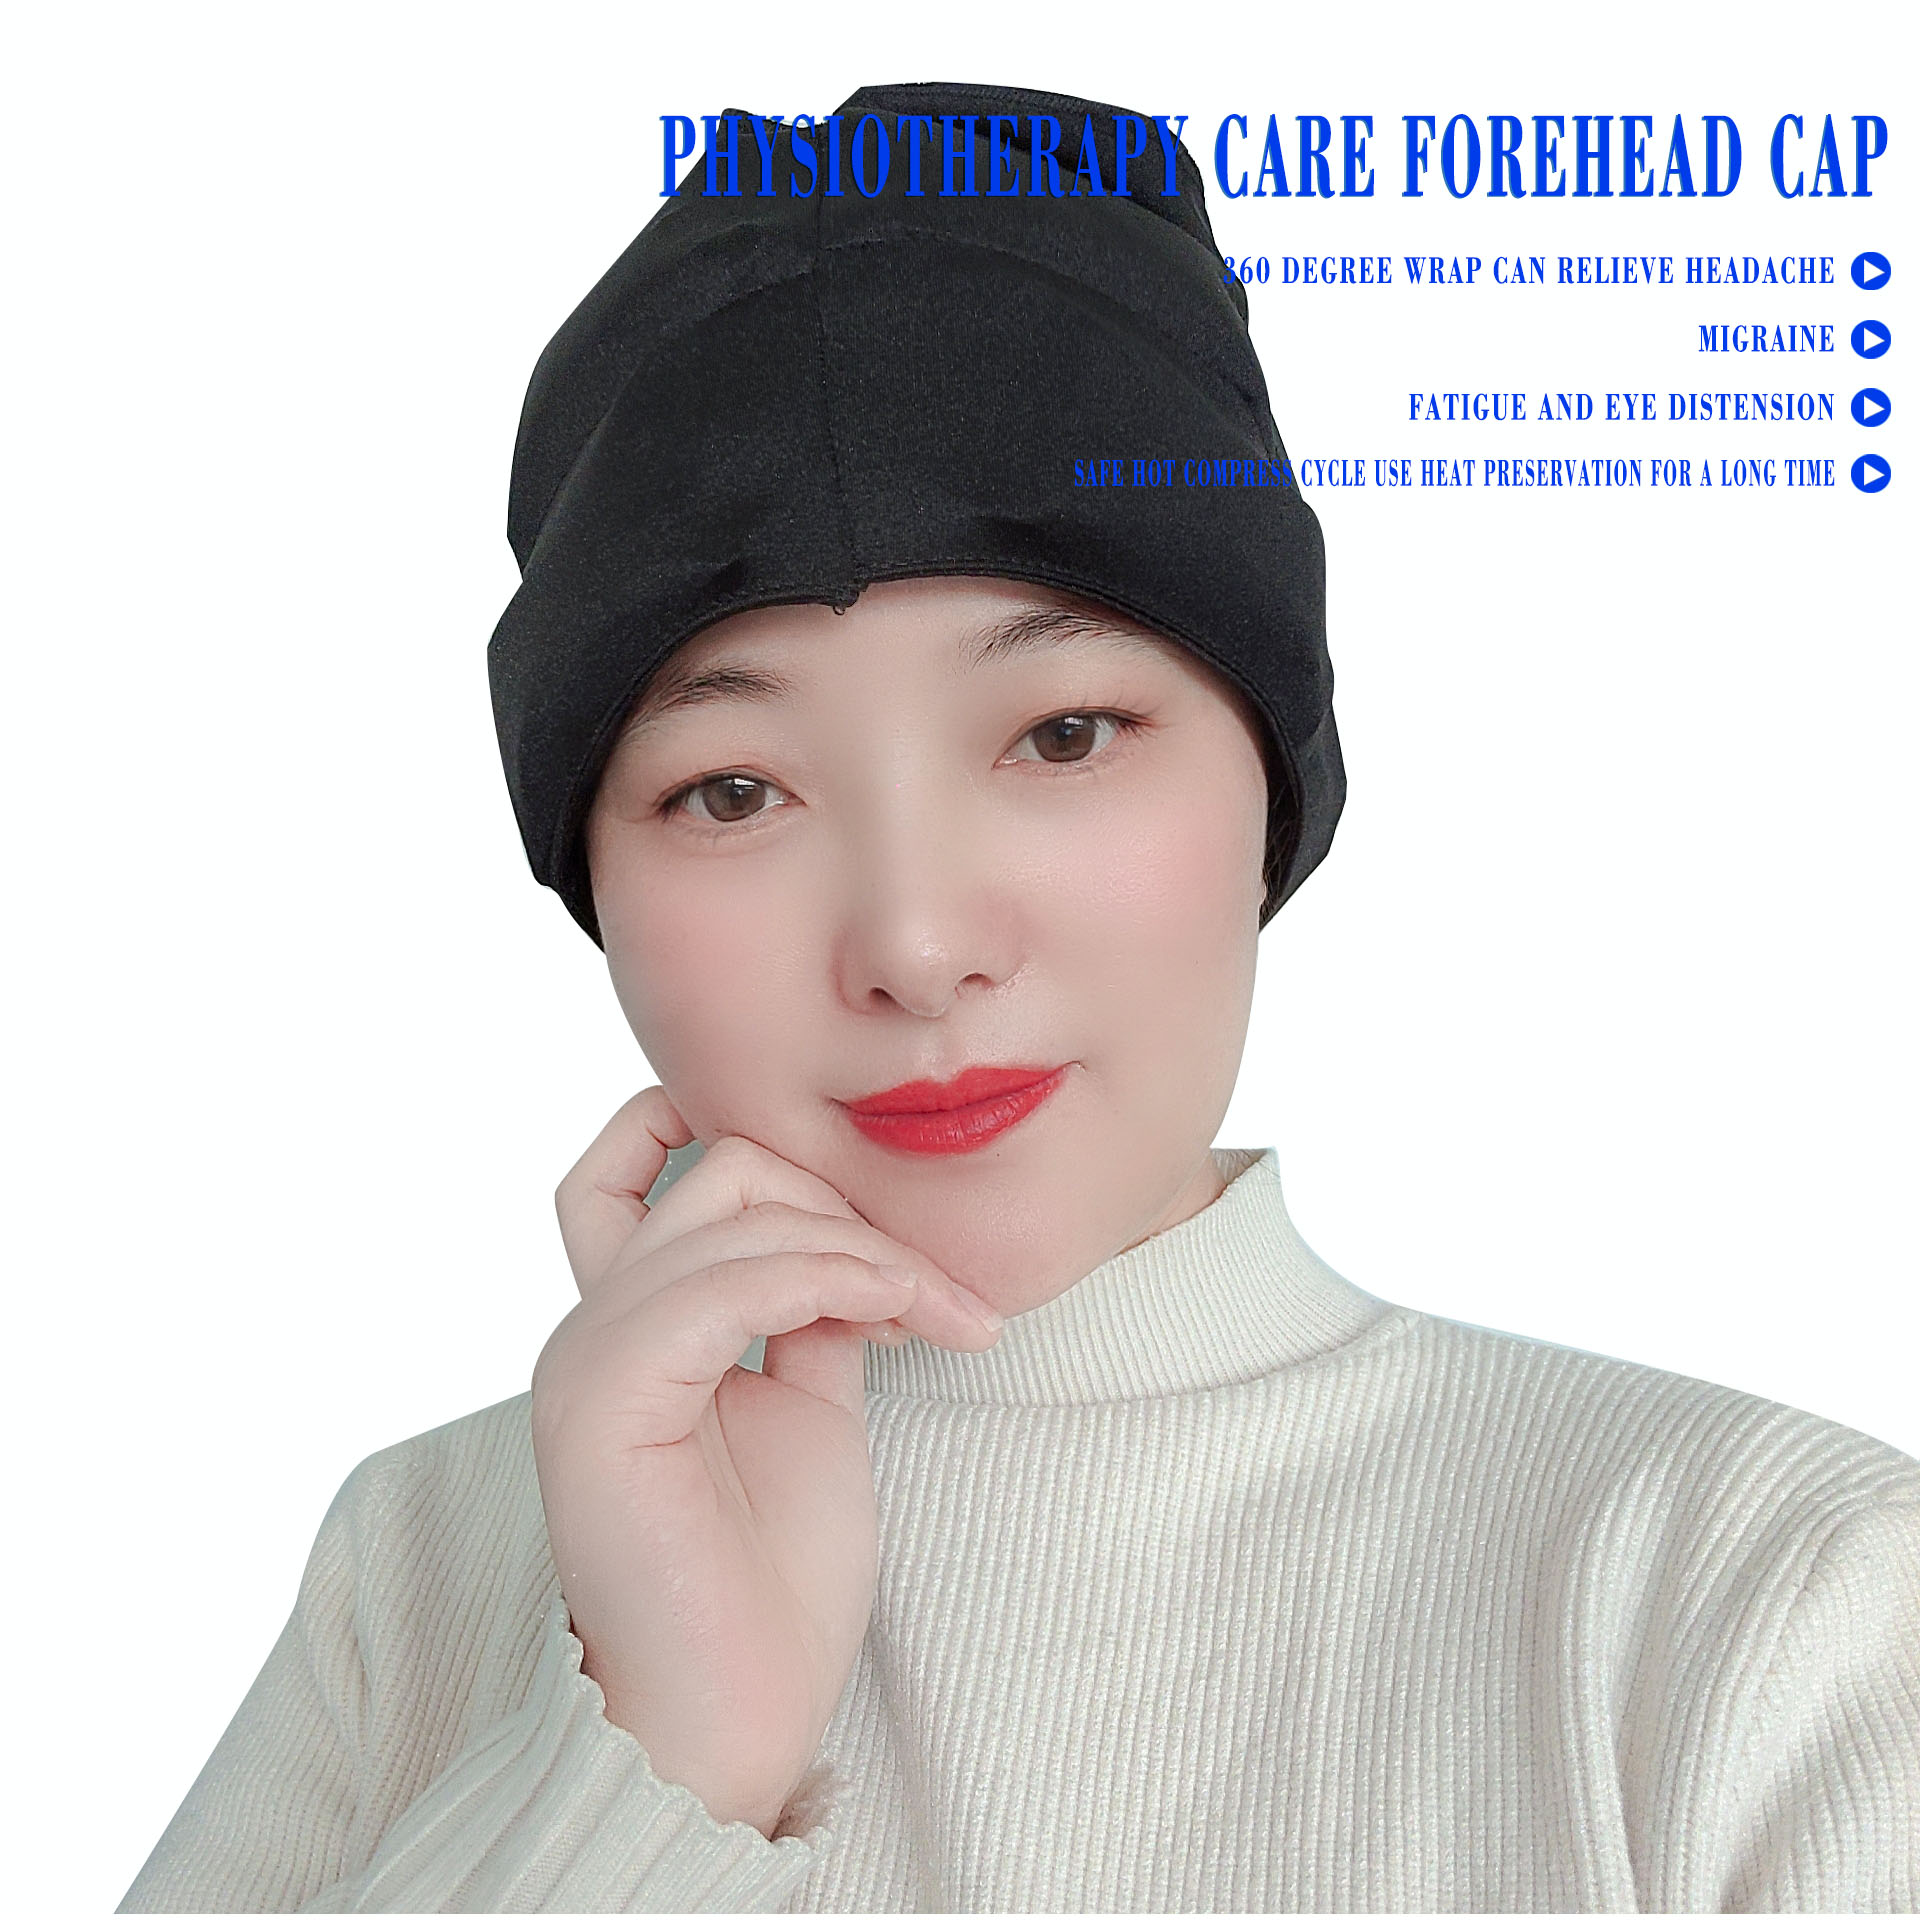 Factory Direct: Cold/Hot Compress Mask for Headache Relief - Physiotherapy Care to Soothe Forehead - Ice Pack & Stretch Mask